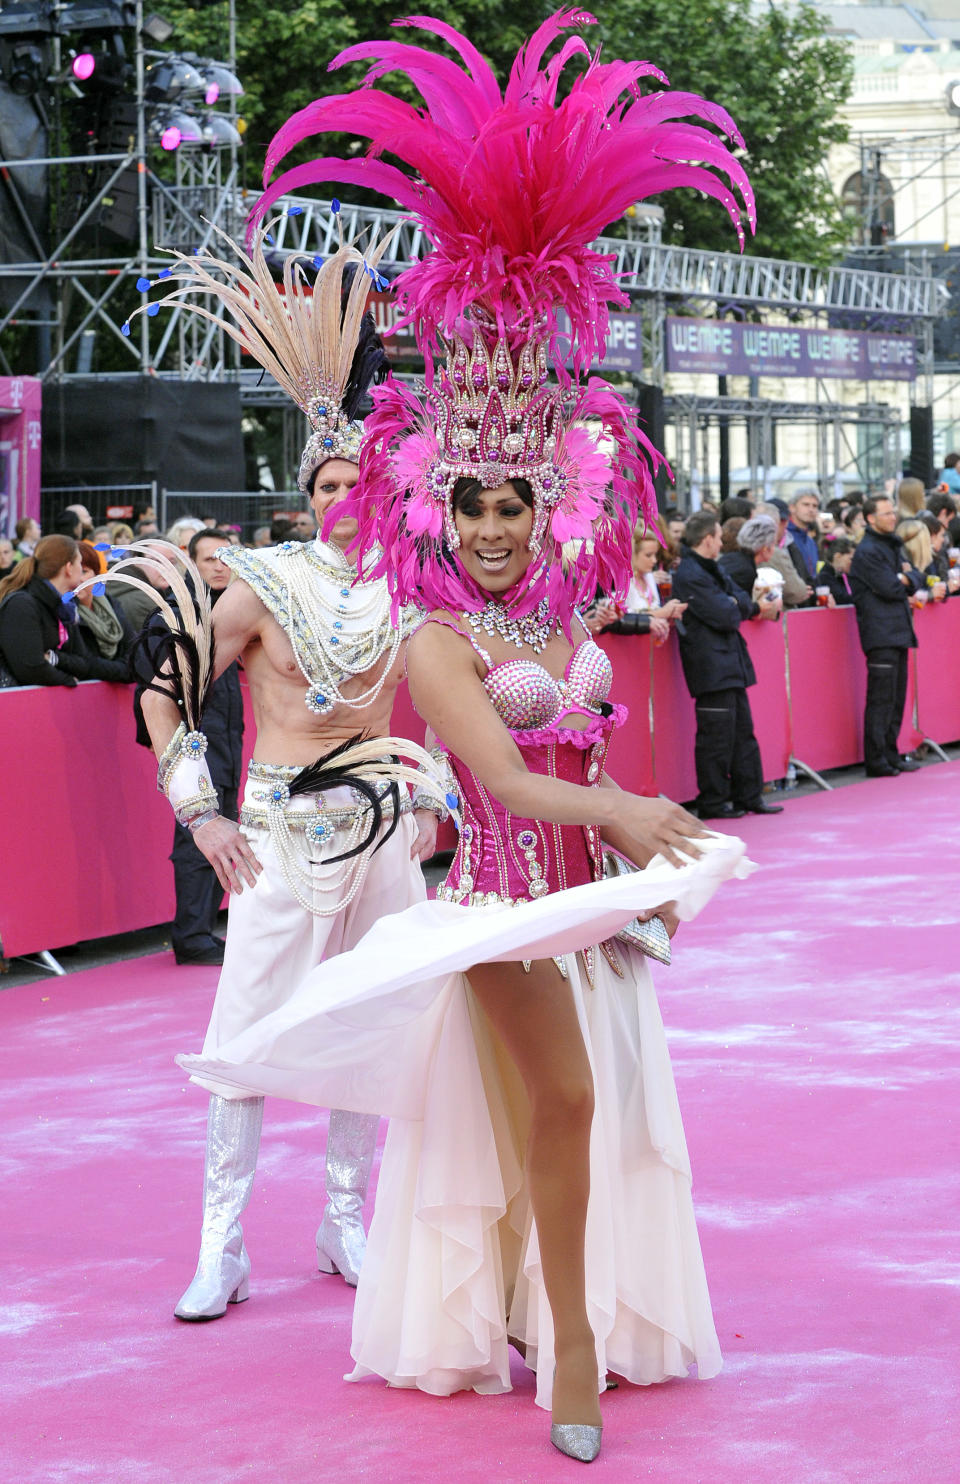 Guests in fancy costumes arrive for the opening ceremony of the 21st Life Ball in front of city hall in Vienna, Austria, on Saturday, May 25, 2013. The Life Ball is a charity gala to raise money for people living with HIV and AIDS. (AP Photo/Hans Punz)